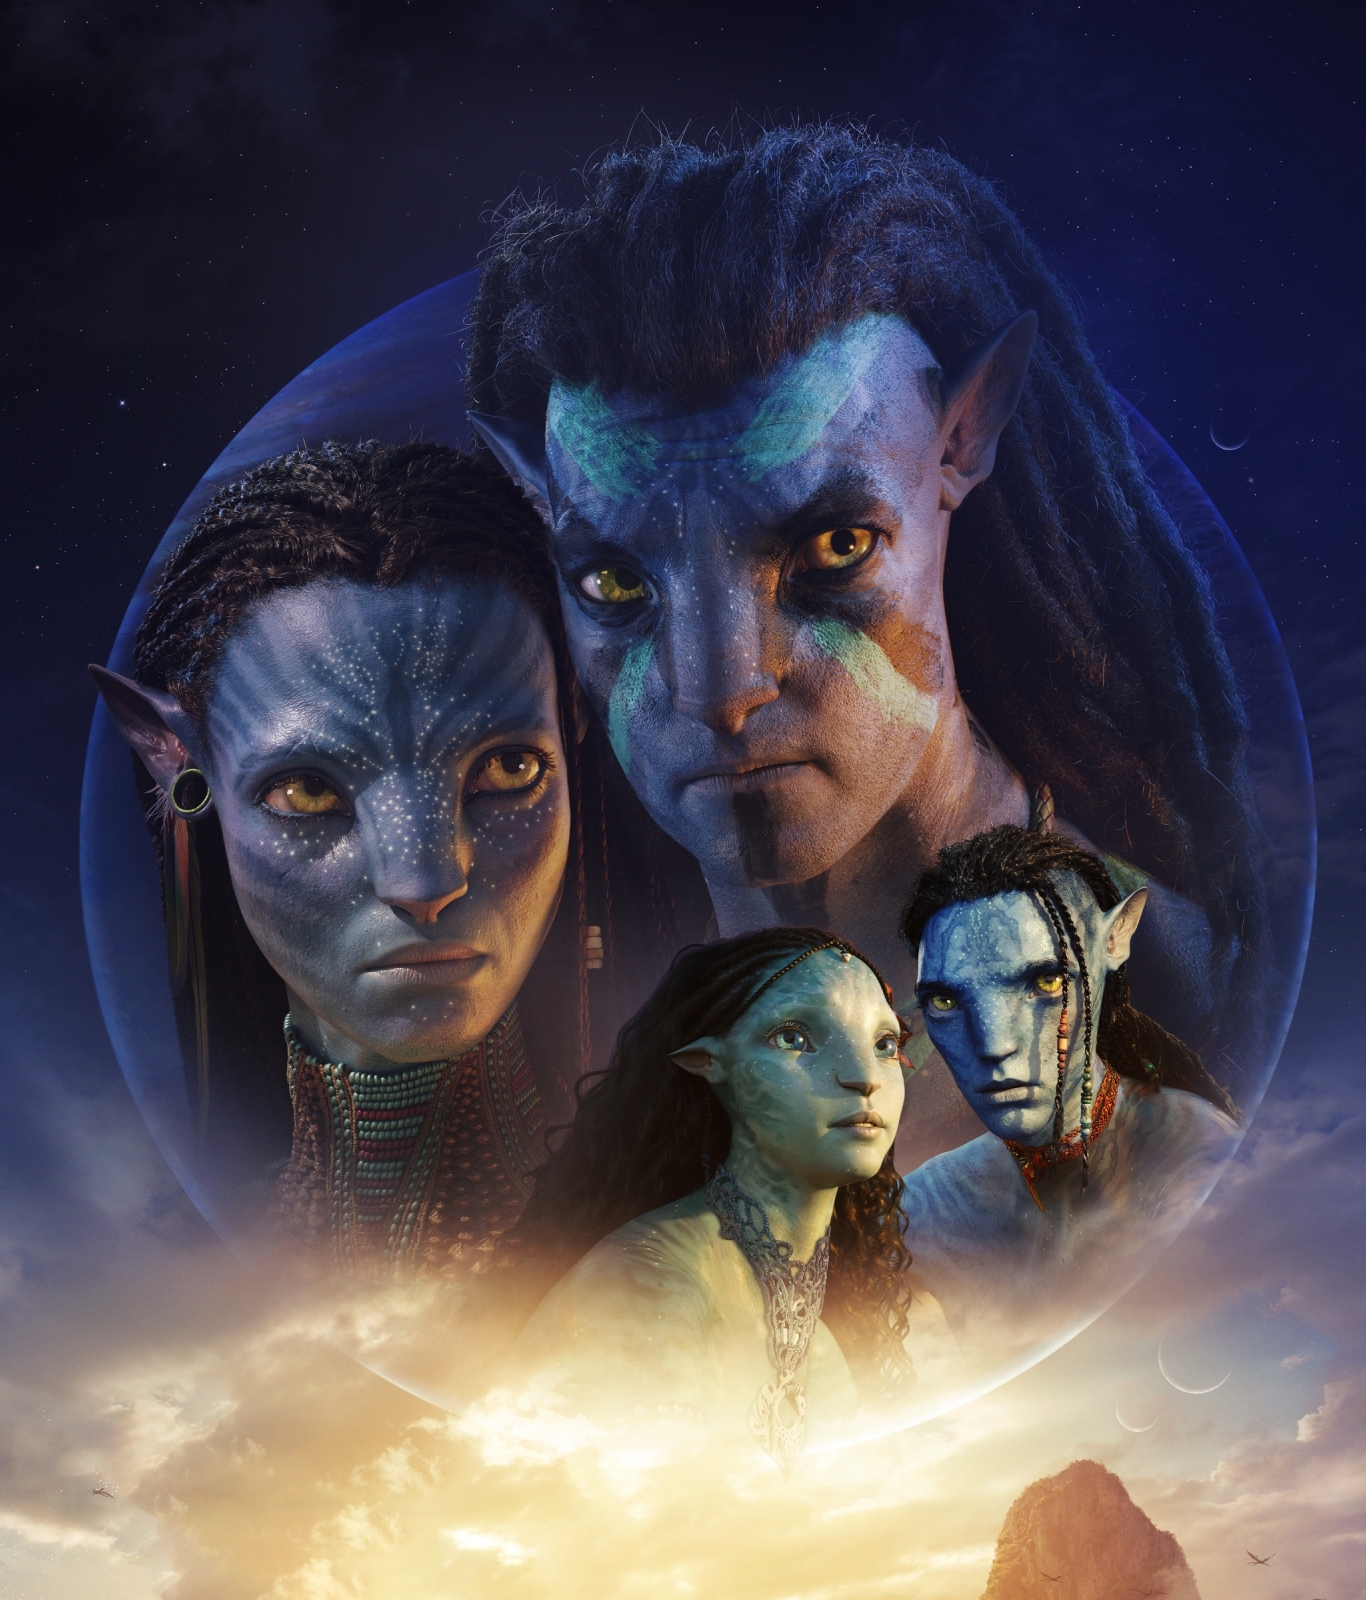 1366x1600 Avatar 2 The Way Of Water Movie Poster 1366x1600 Resolution Wallpaper Hd Movies 4k 3064